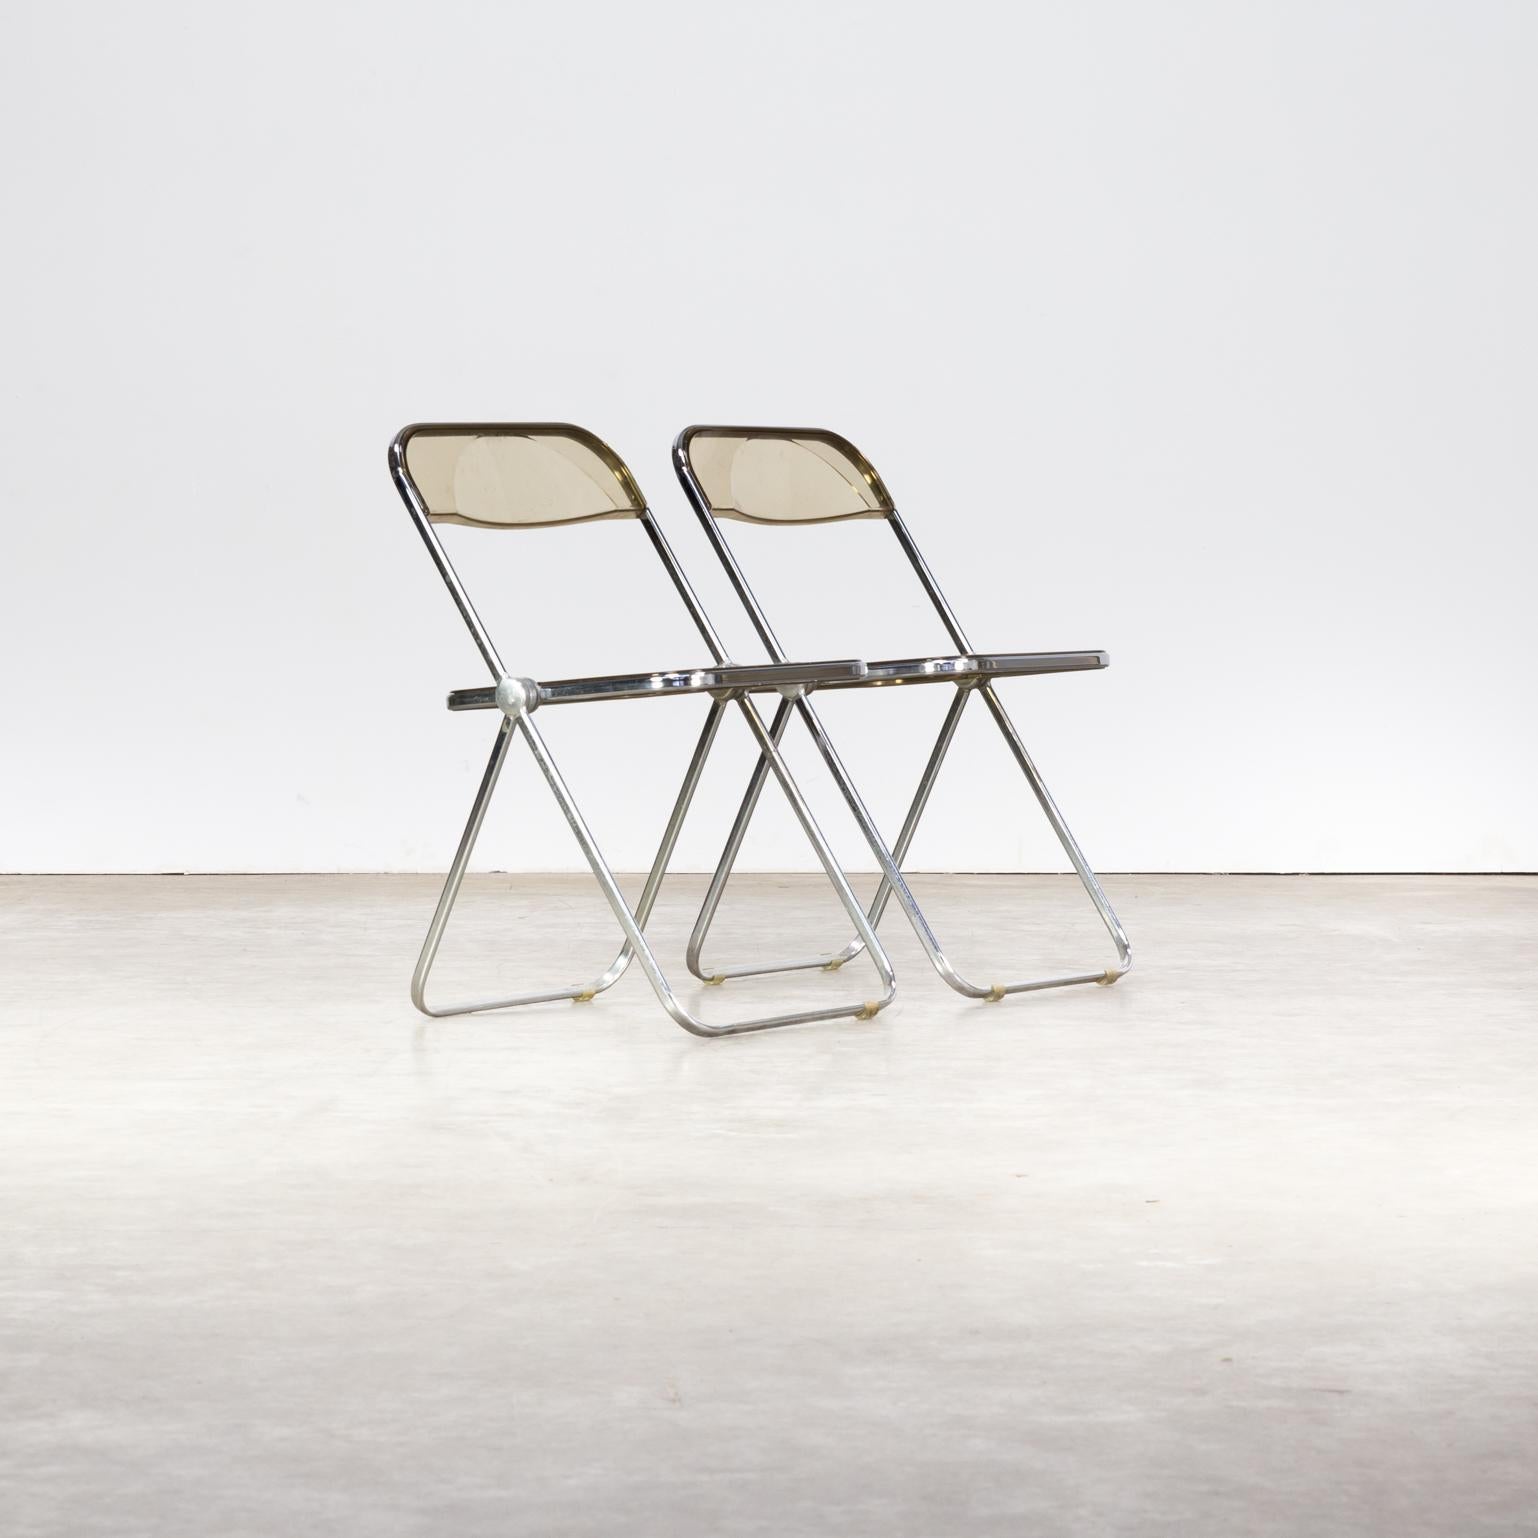 1970s Giancarlo Piretti ‘Plia’ Folding Chair for Castelli Set of 2 In Good Condition For Sale In Amstelveen, Noord